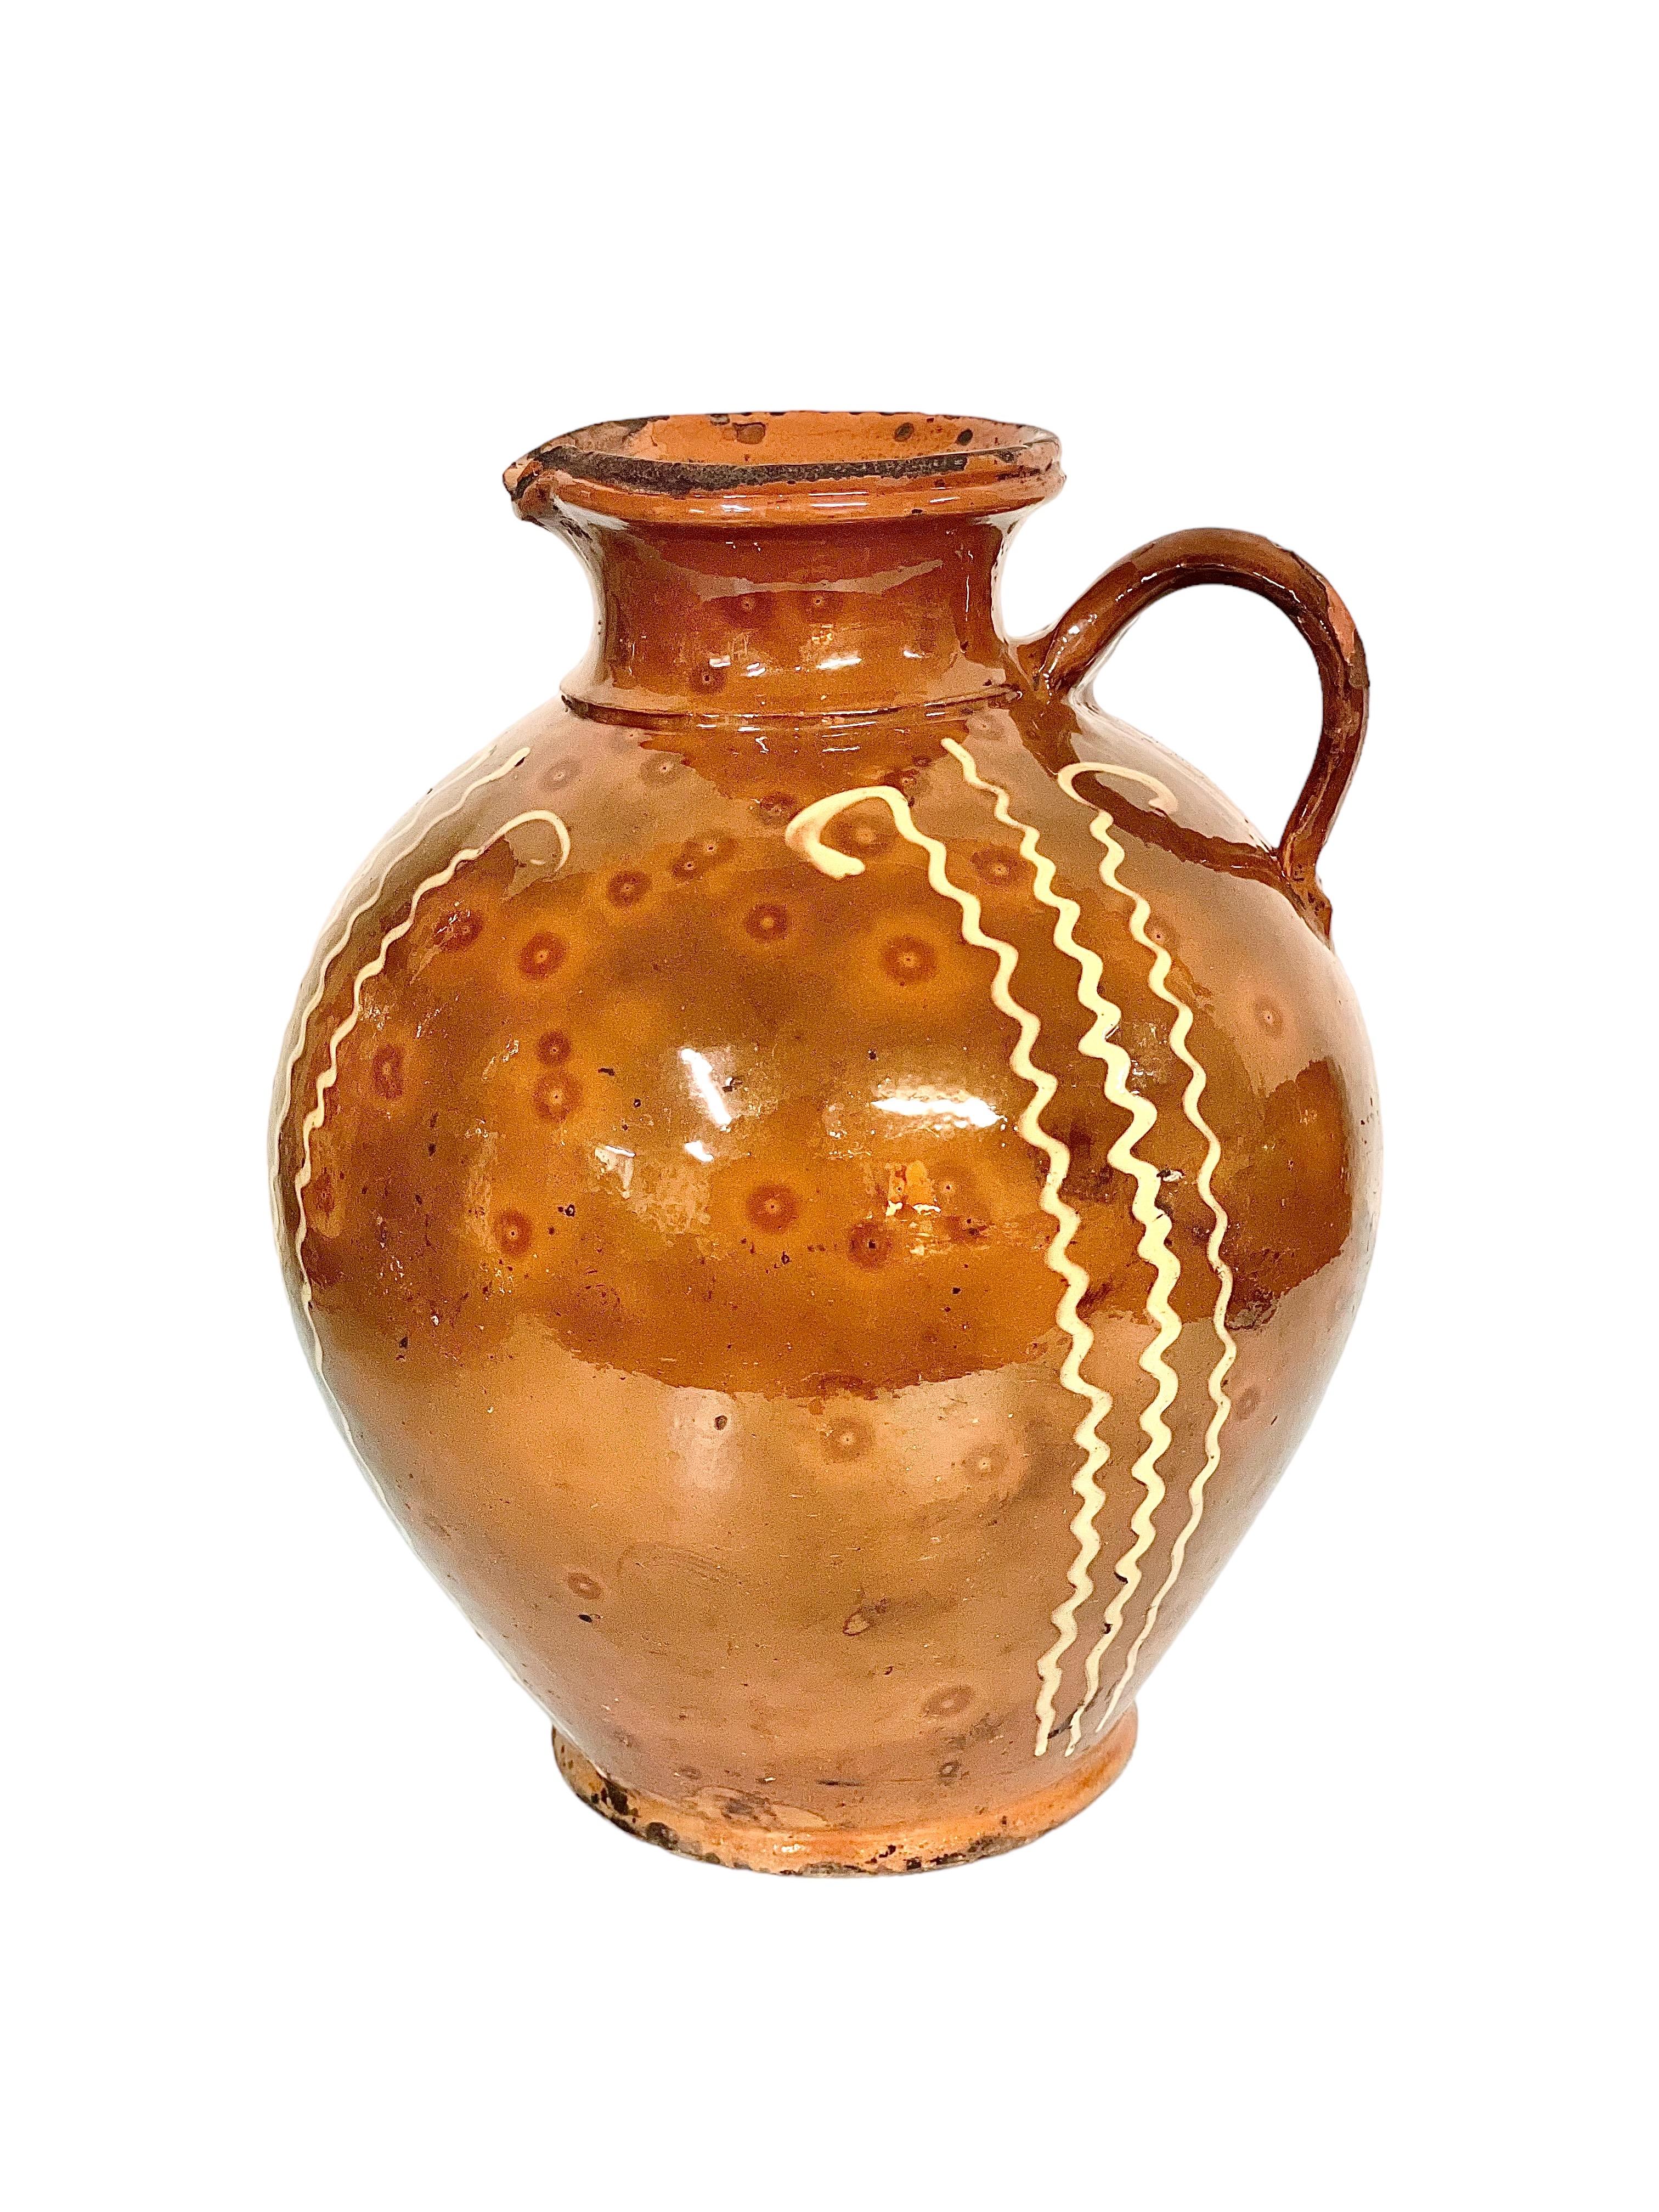 A rustic French pottery jug with handle and shaped spout from the 19th century, in glazed terracotta with a striking, hand-painted design of vertical yellow zig-zags. Originally a piece of utilitarian kitchenware, used for transporting and storing